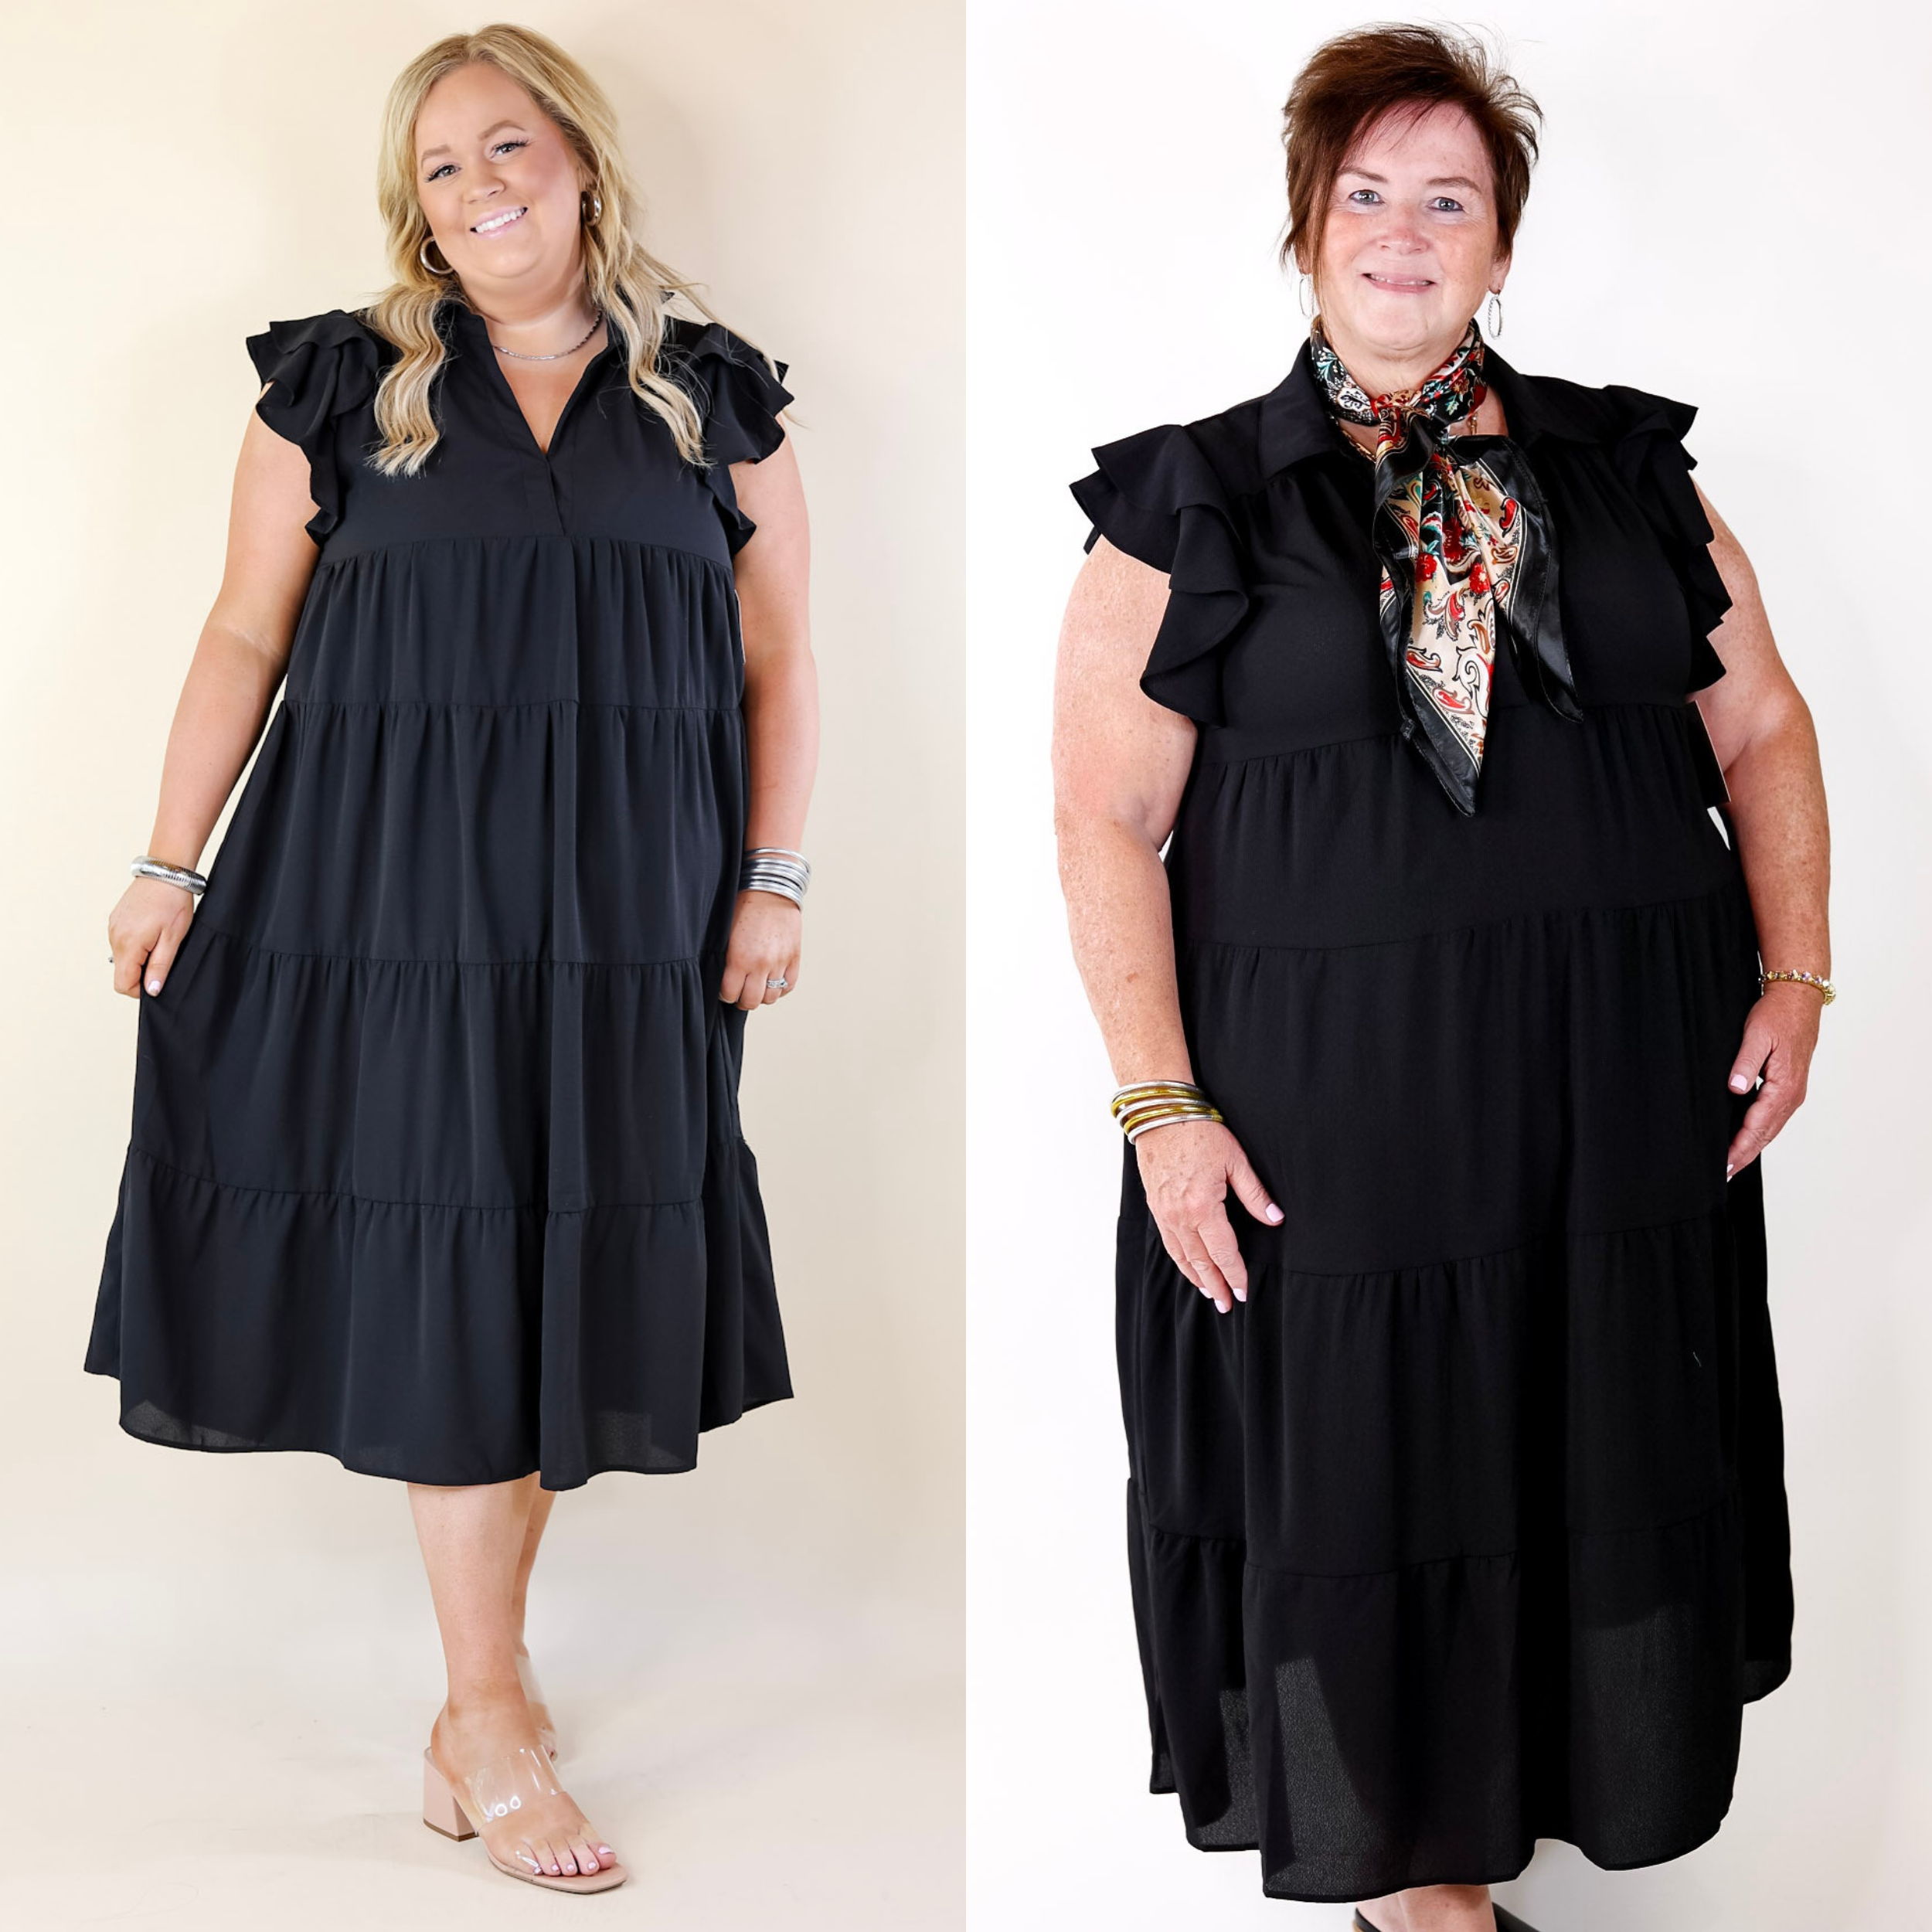 All Of A Sudden Tiered Midi Dress with Ruffle Cap Sleeves in Black - Giddy Up Glamour Boutique